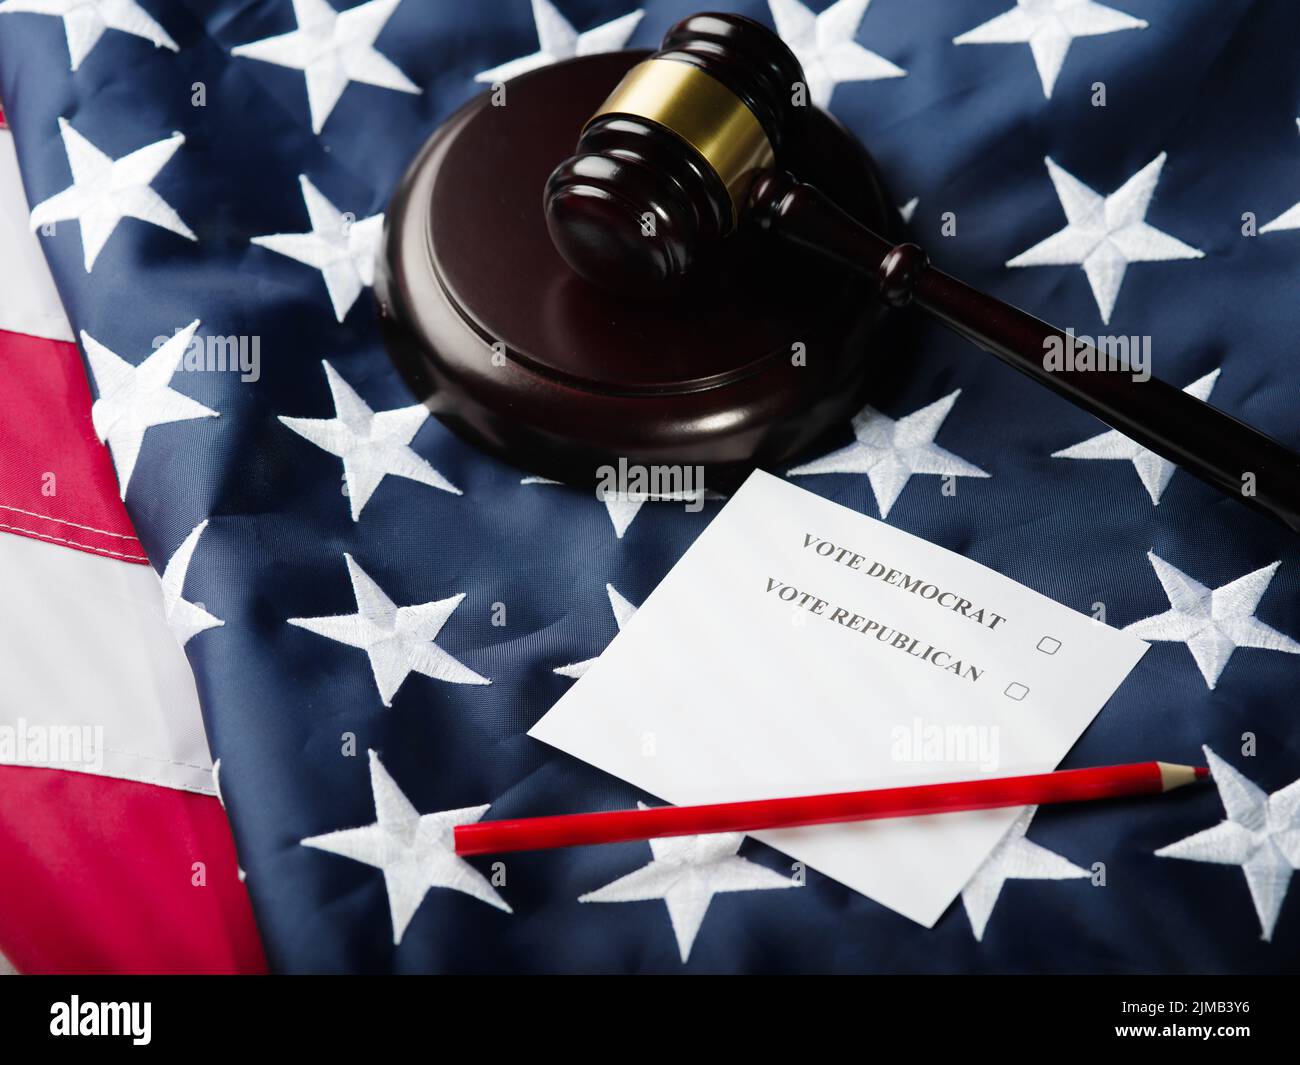 Elections, voting. Vote Democrat, Vote Republican - inscriptions on sheets of paper, a wooden gavel of a judge against the background of the state Ame Stock Photo